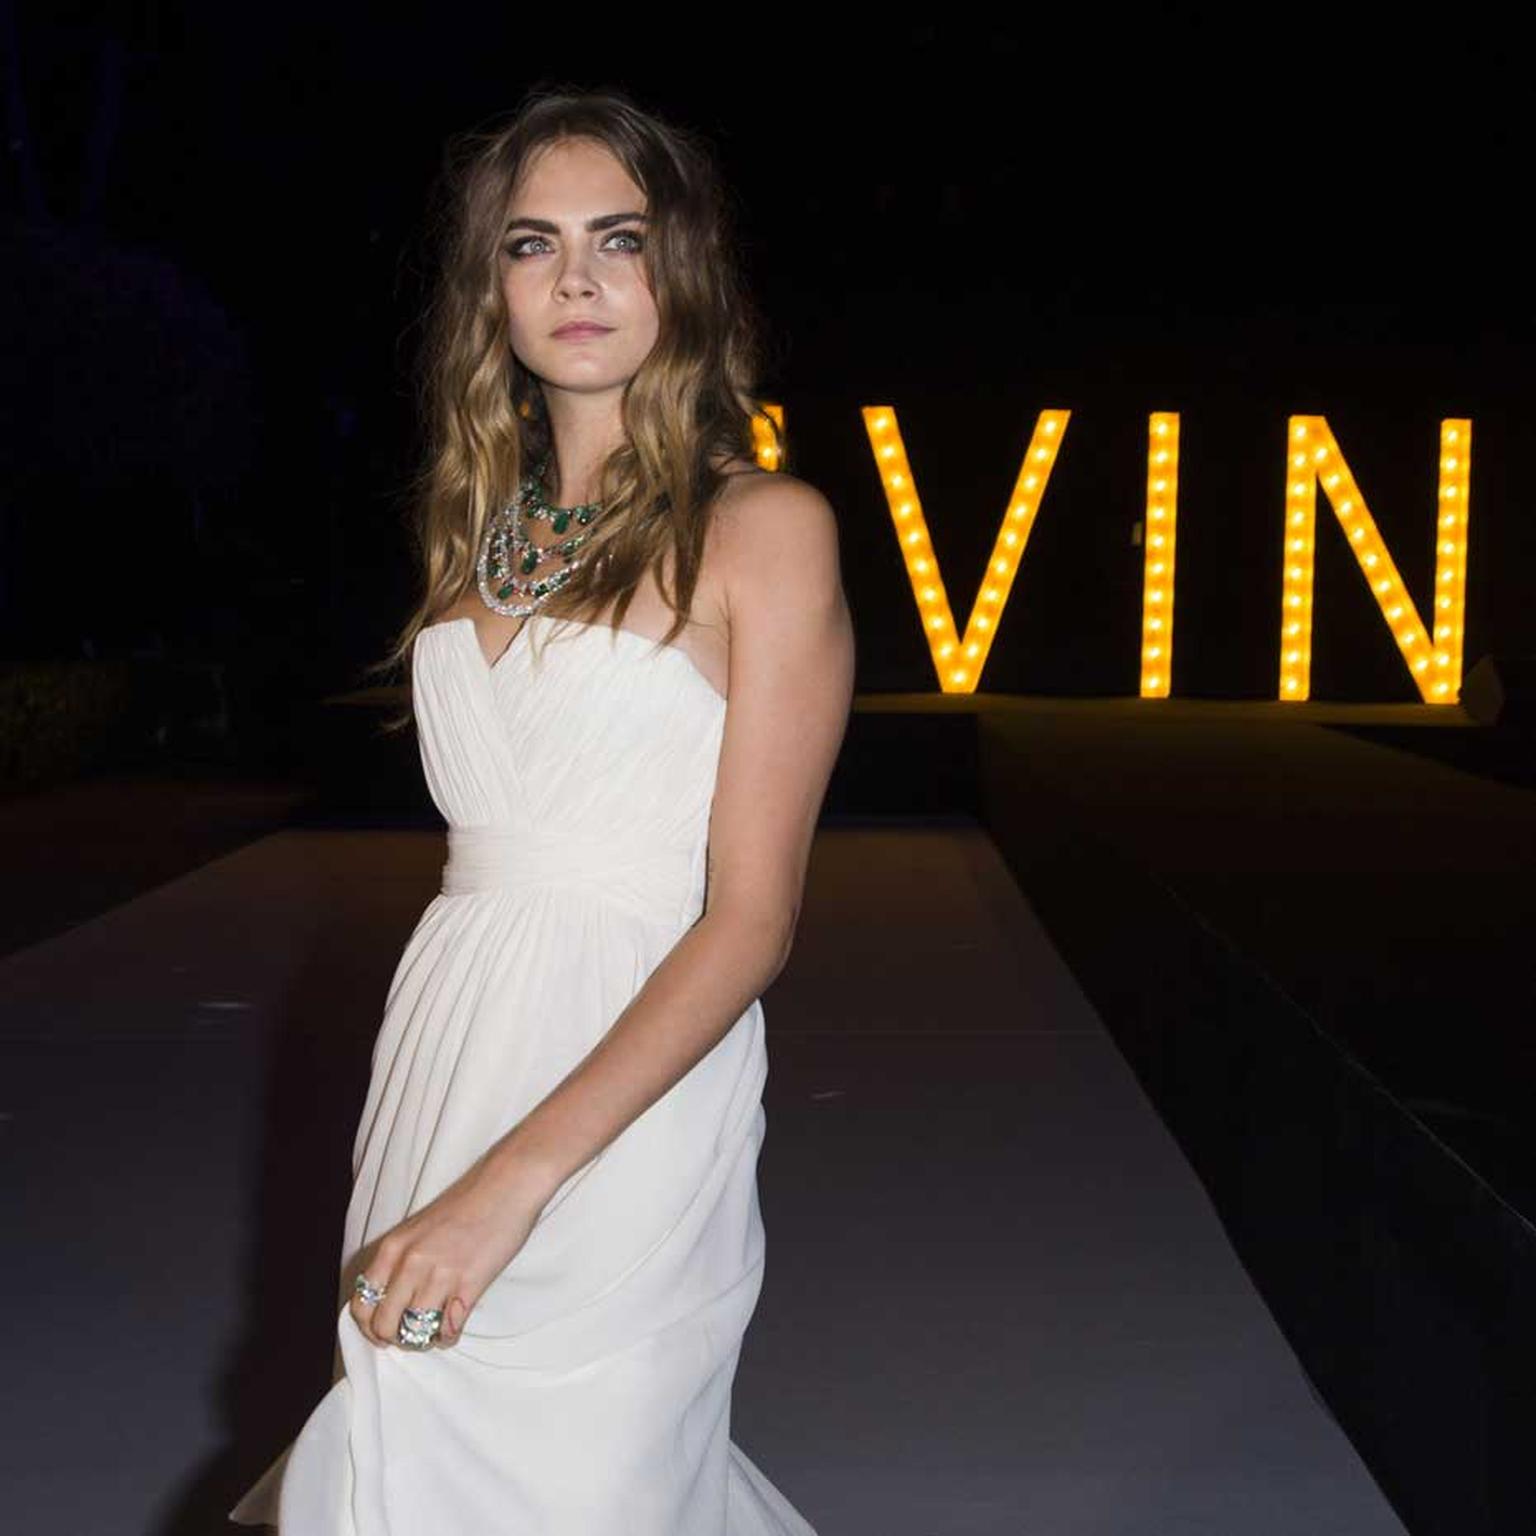 Arriving at de GRISOGONO's "Divine in Cannes" party, Cara Delevingne cuts a striking figure in an angelic white dress accessorised with a unique emerald, diamond and ruby high jewellery necklace.